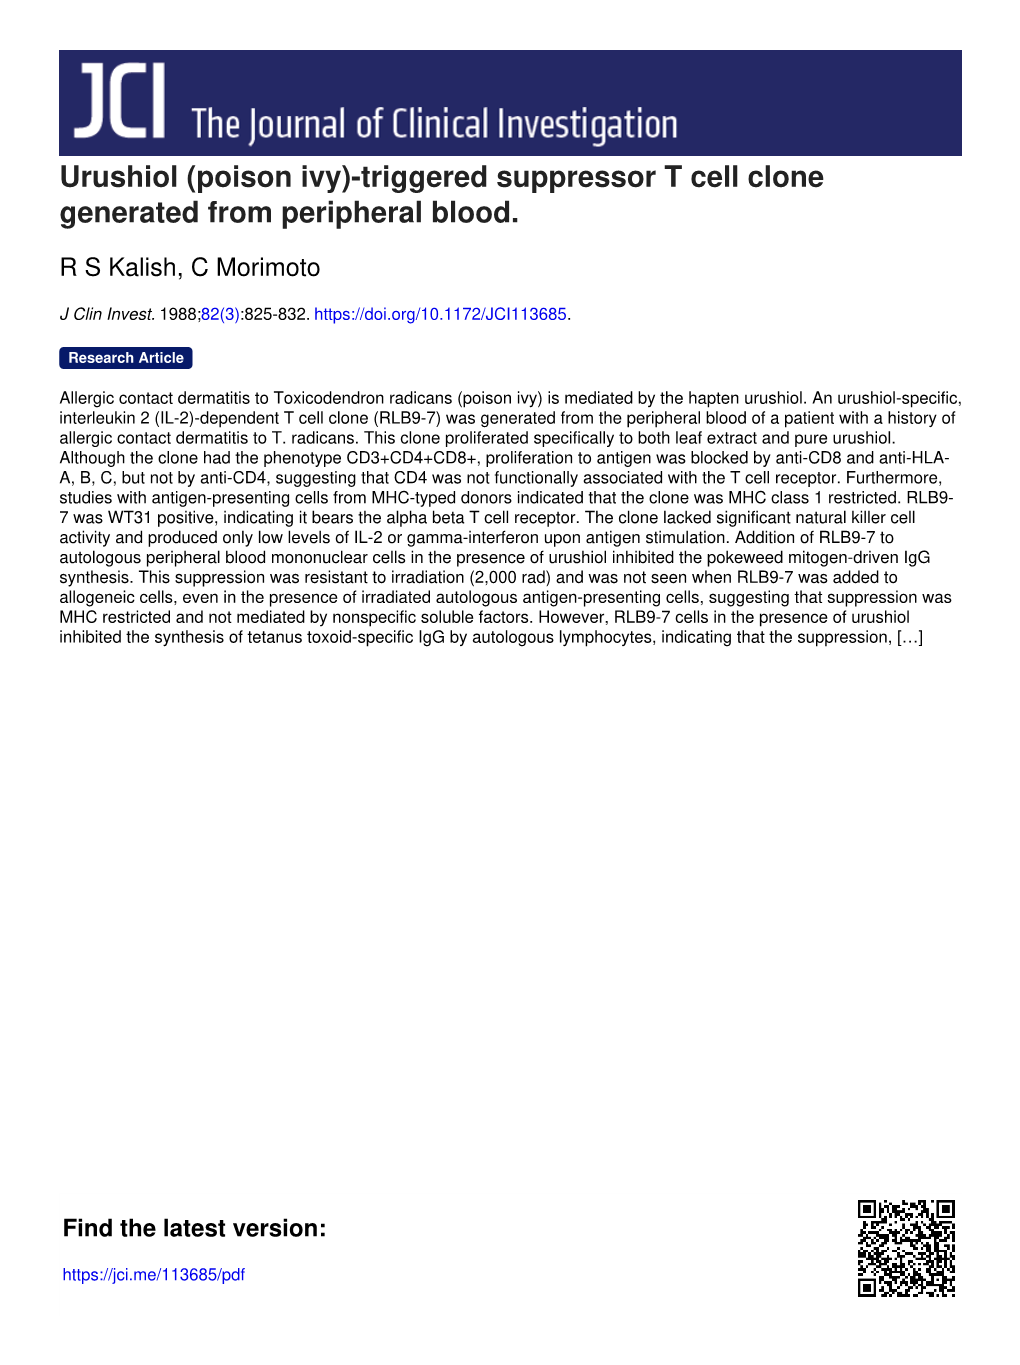 Urushiol (Poison Ivy)-Triggered Suppressor T Cell Clone Generated from Peripheral Blood